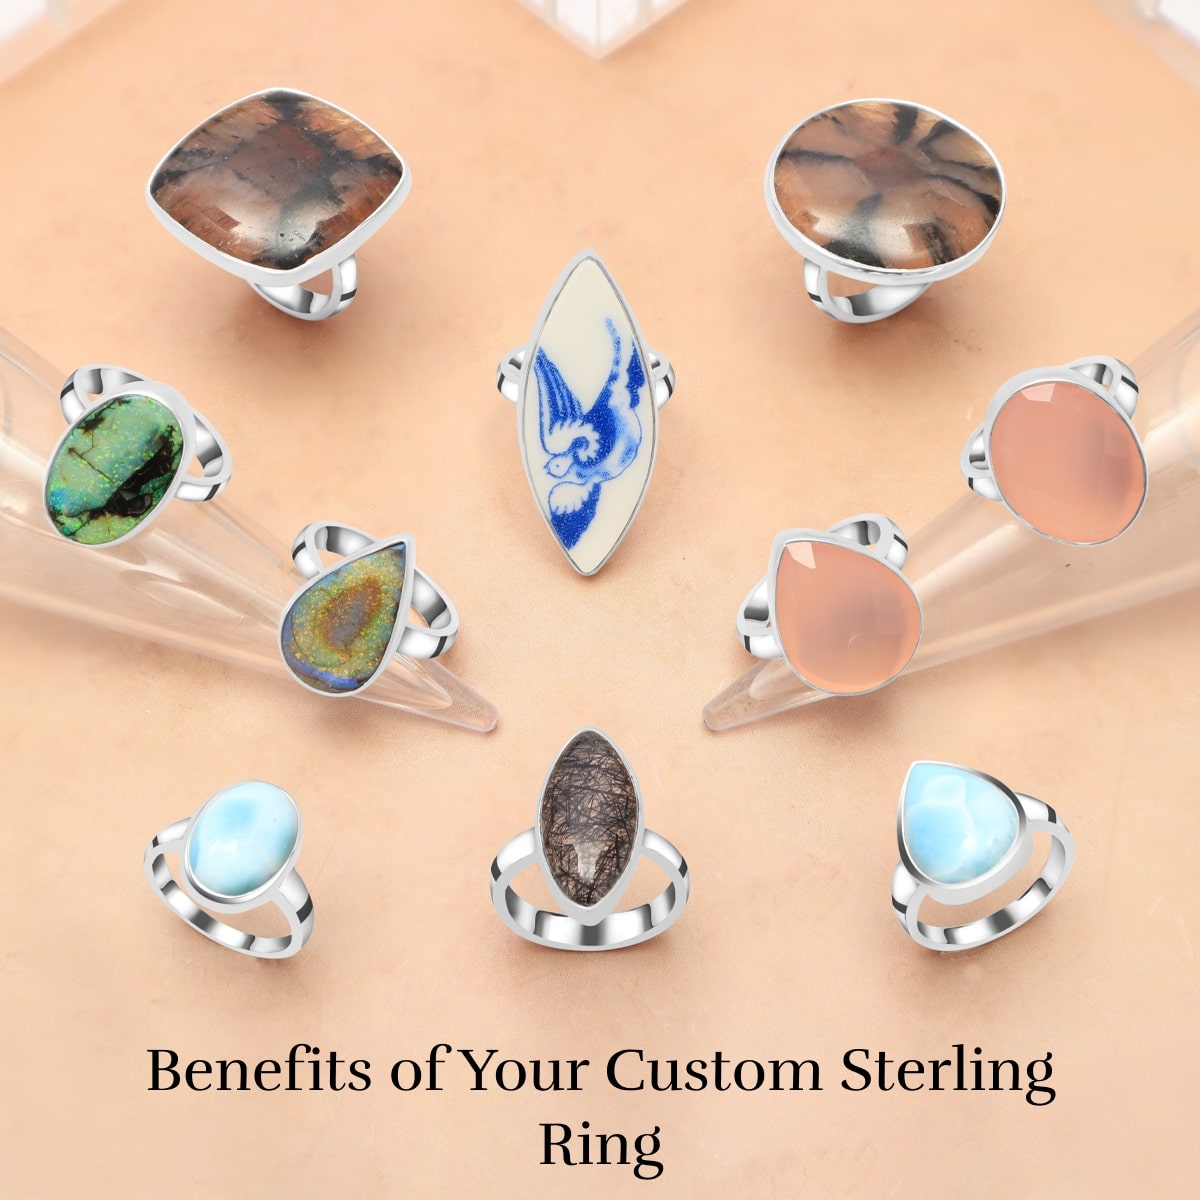 Customized Sterling Silver Ring and it's Benefits